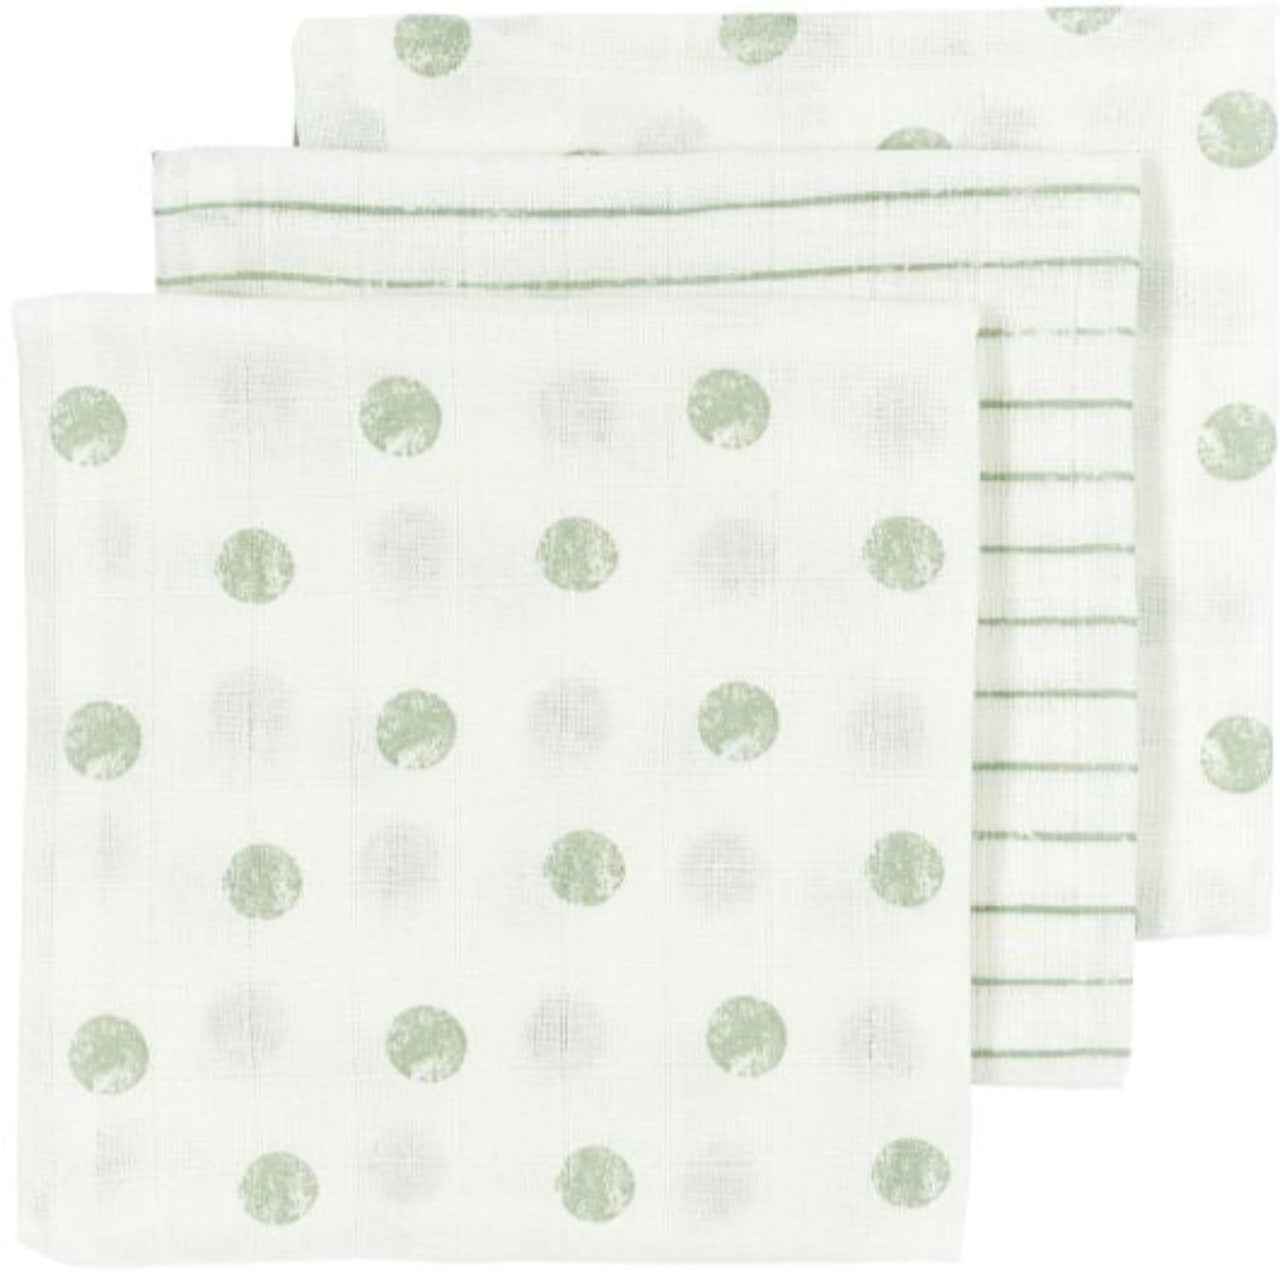 Hydrophilic nappies 3-pack (various designs)